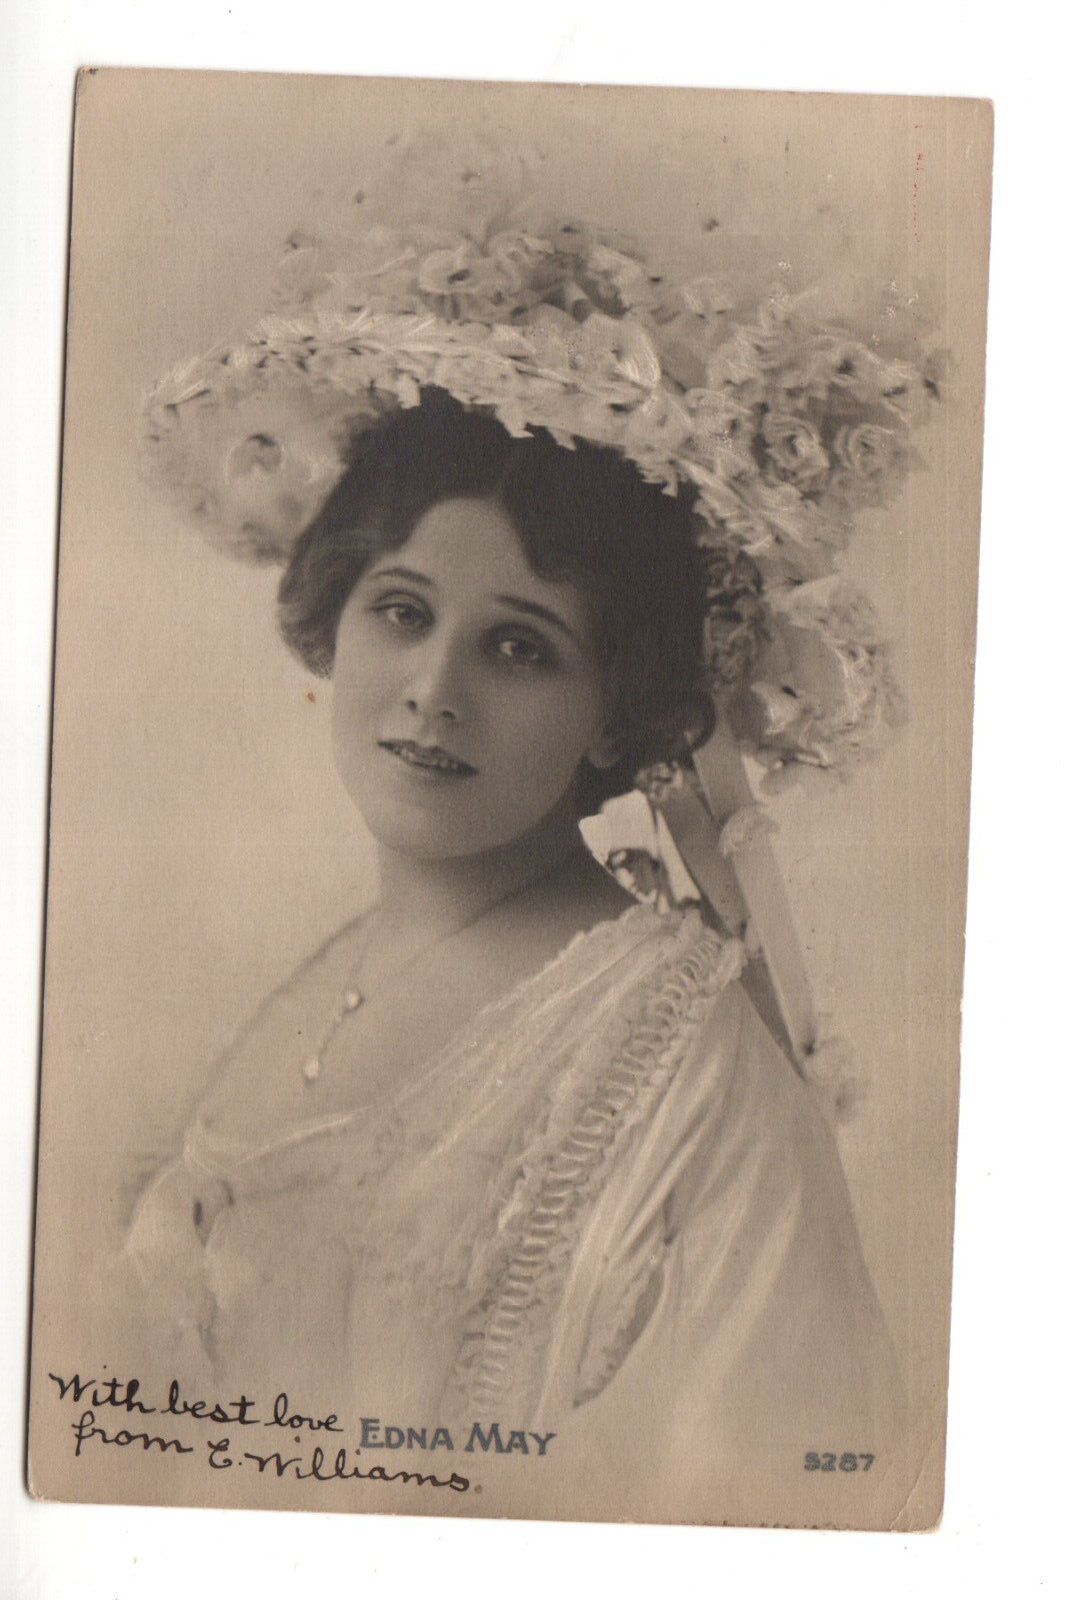 Postcard: Edna May, stage and screen actress, (1878 – 1948), fan club card